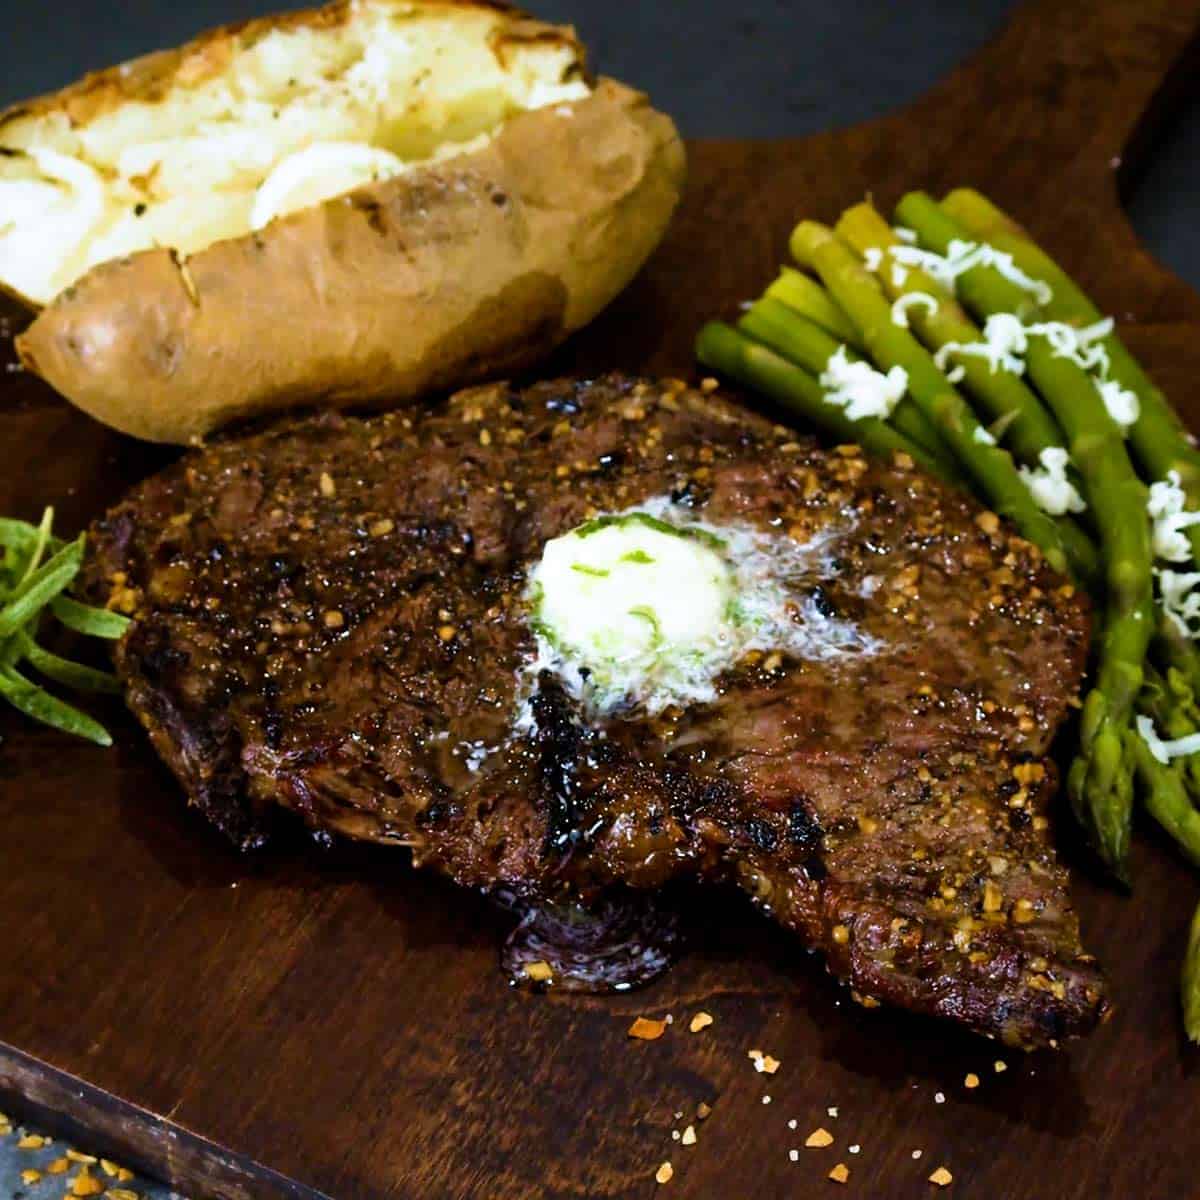 Grilled rib eye steak on a cutting board with asparagus and a baked potato